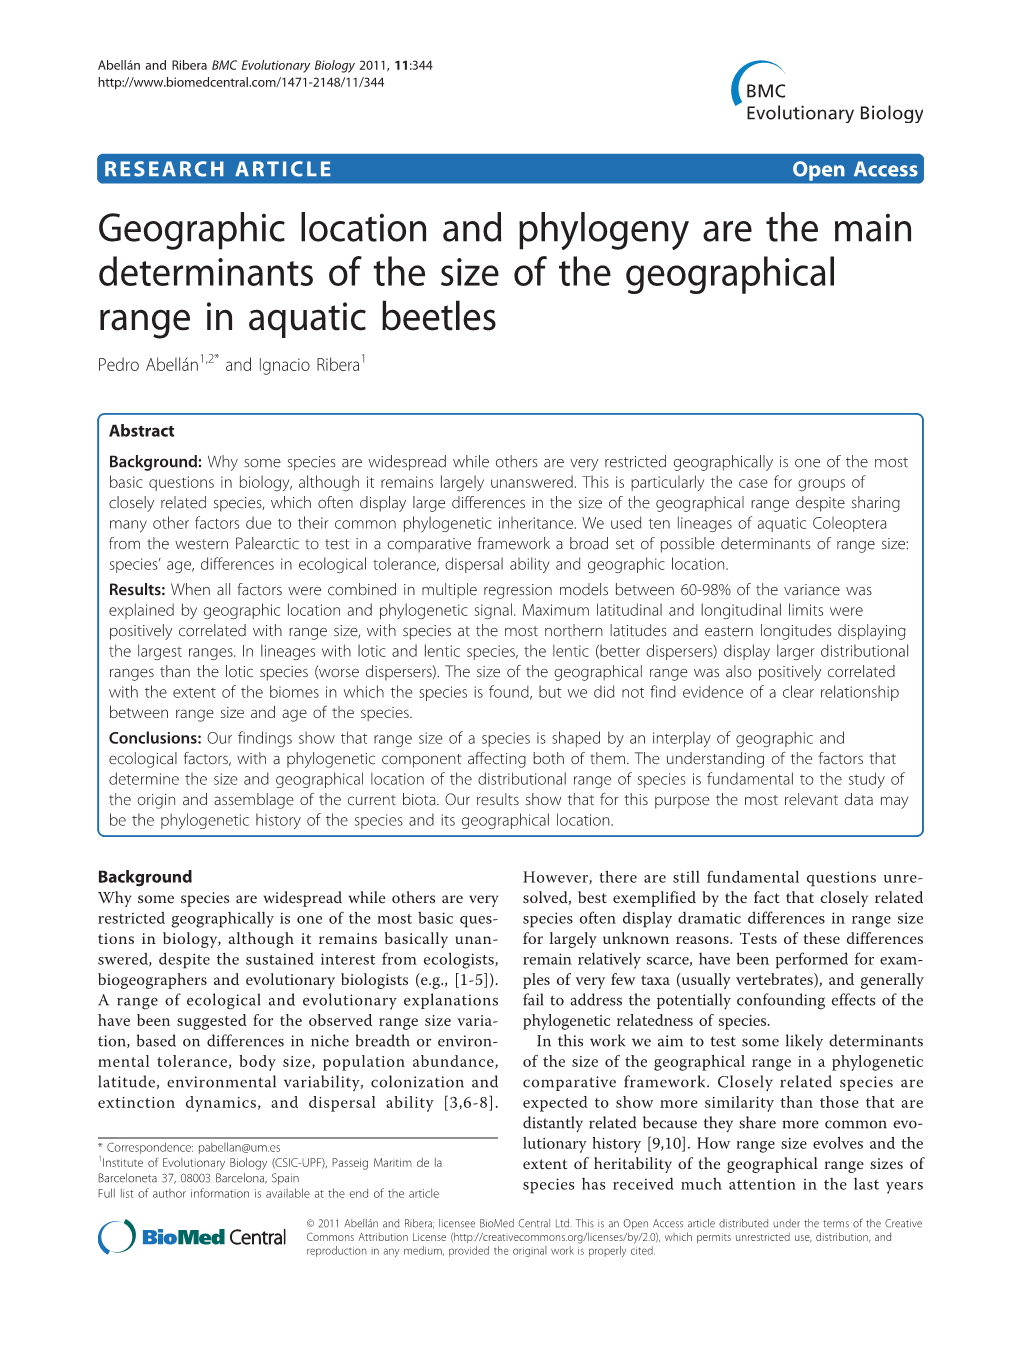 Geographic Location and Phylogeny Are the Main Determinants of the Size of the Geographical Range in Aquatic Beetles Pedro Abellán1,2* and Ignacio Ribera1